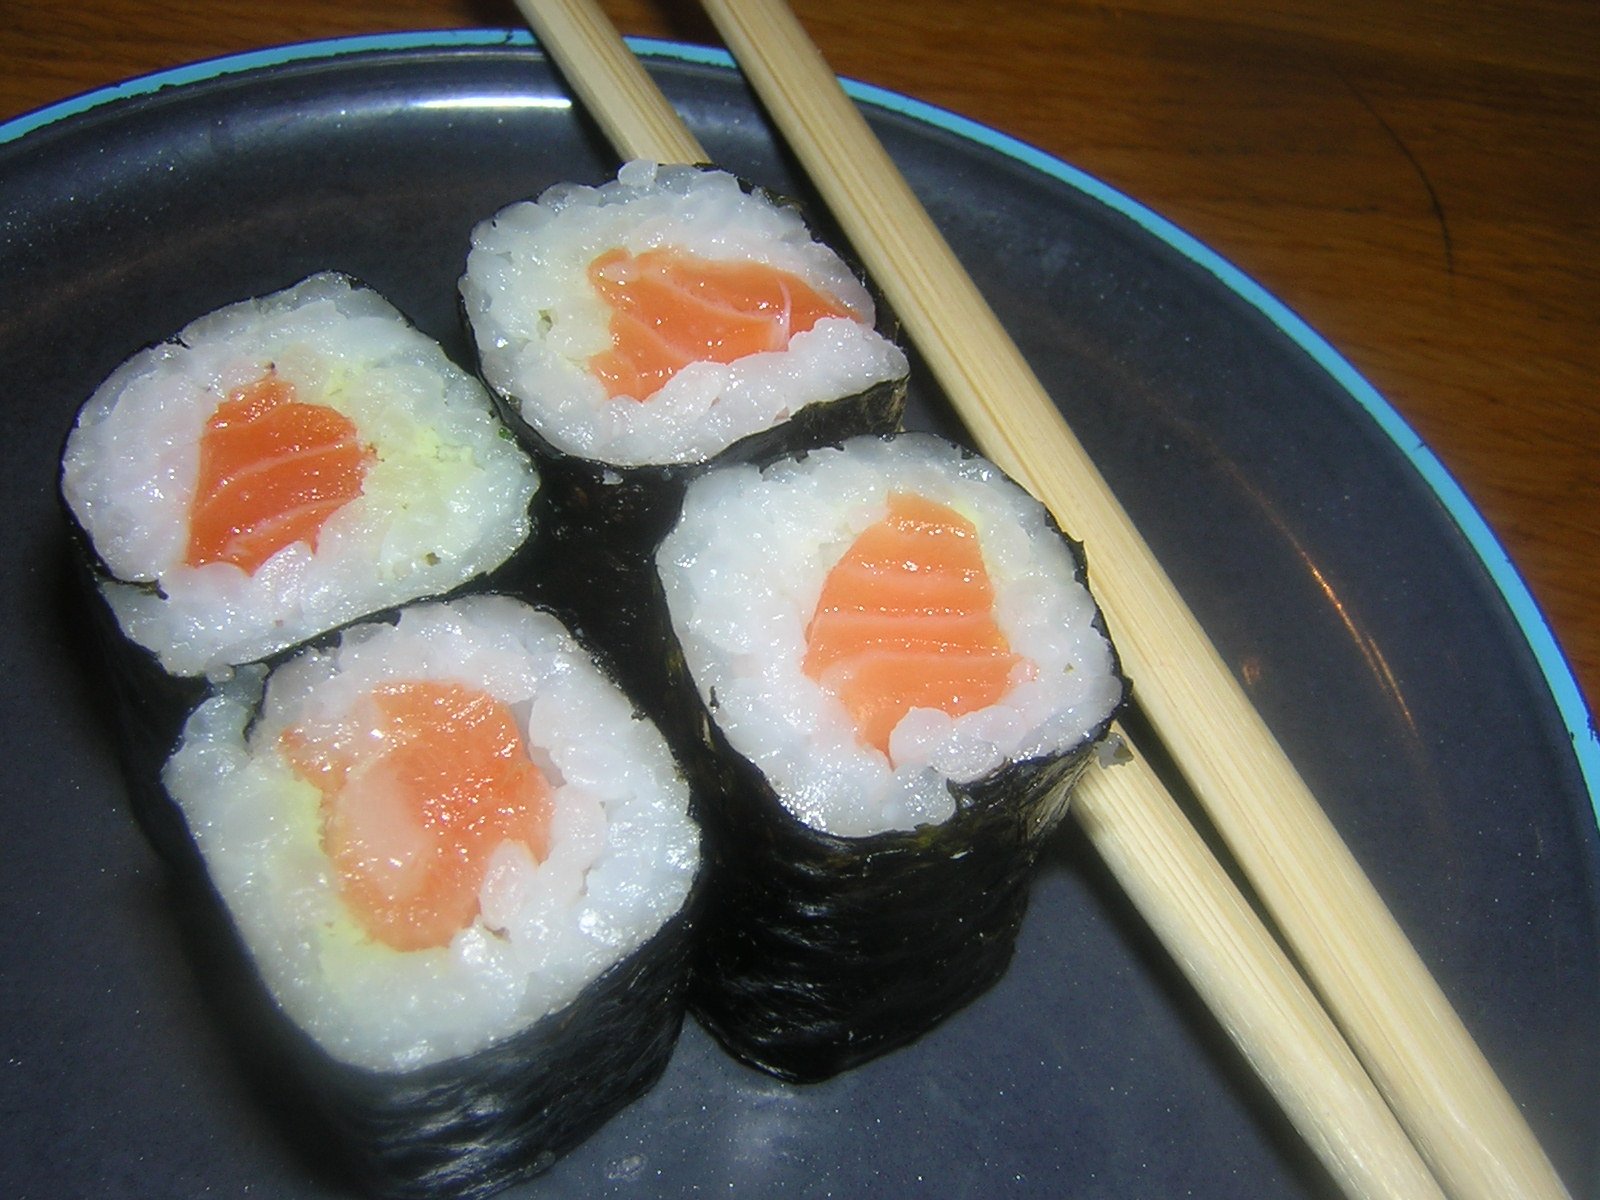 a small plate holding rolls with sushi, chopsticks